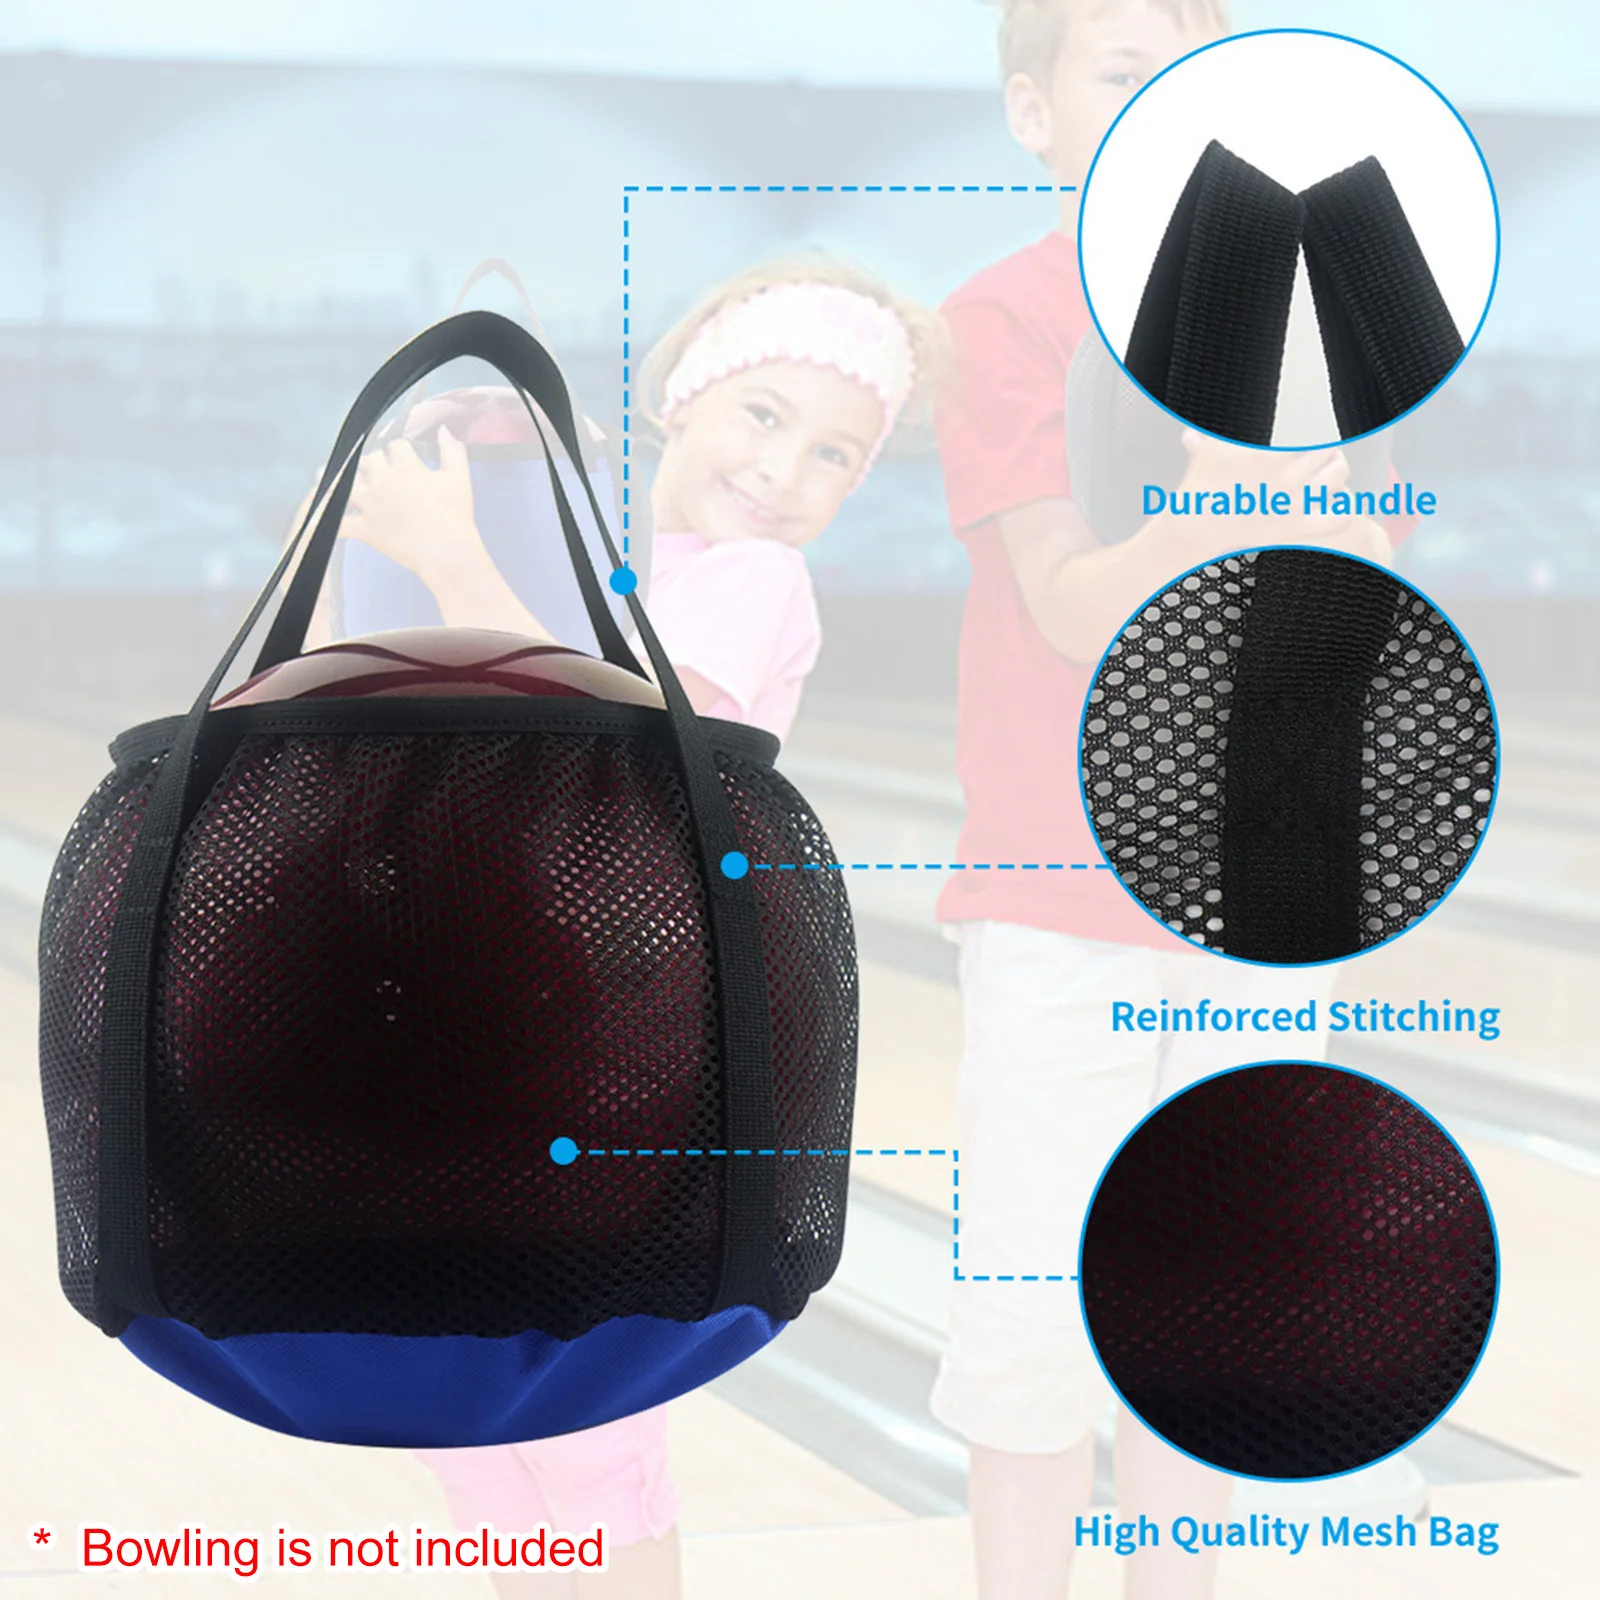 Convenient Bowling Bag Sticky Design As Shown Single Bowling Tote Bag Bowling Rack Small Items Bowling Tote Bag newtop sale plastics earring storage doors design nice jewelry hanging holder rack acrylics jewelry display stand earrings